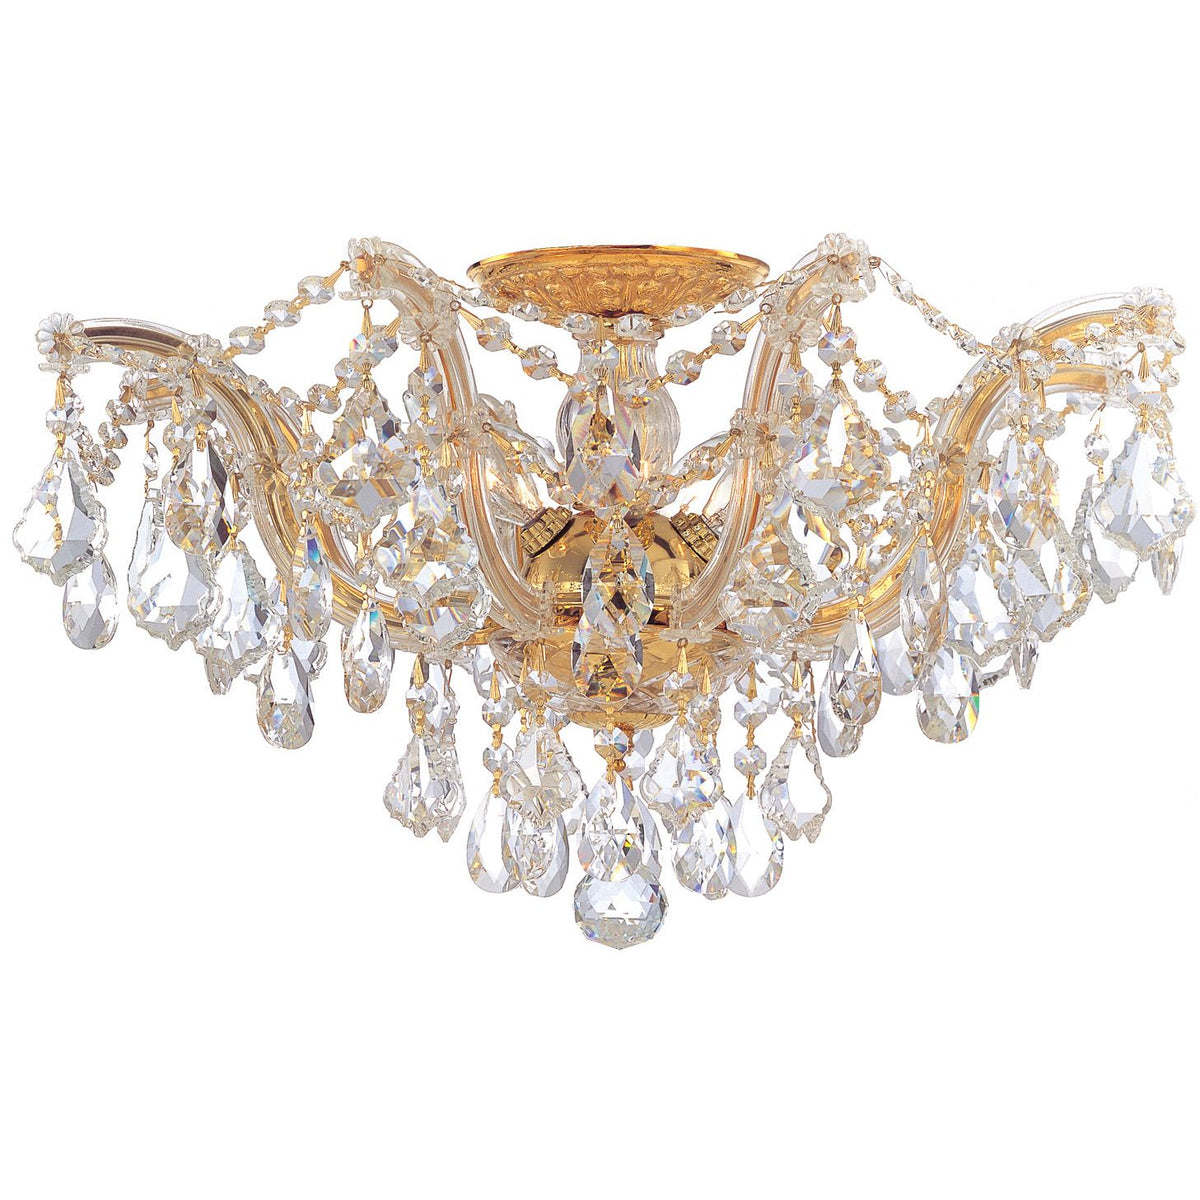 Crystorama - 4437-GD-CL-MWP - Five Light Ceiling Mount - Maria Theresa - Gold